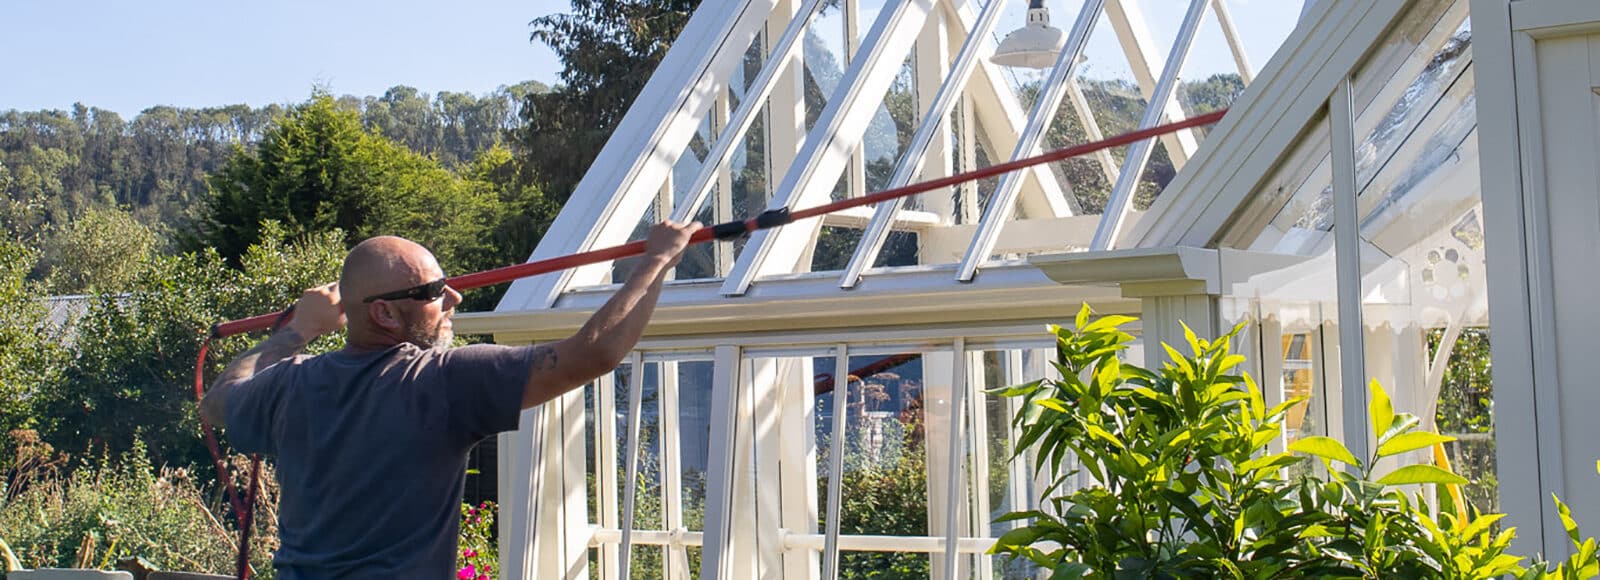 an image of a man cleaning  the roof of a glass greenhouse